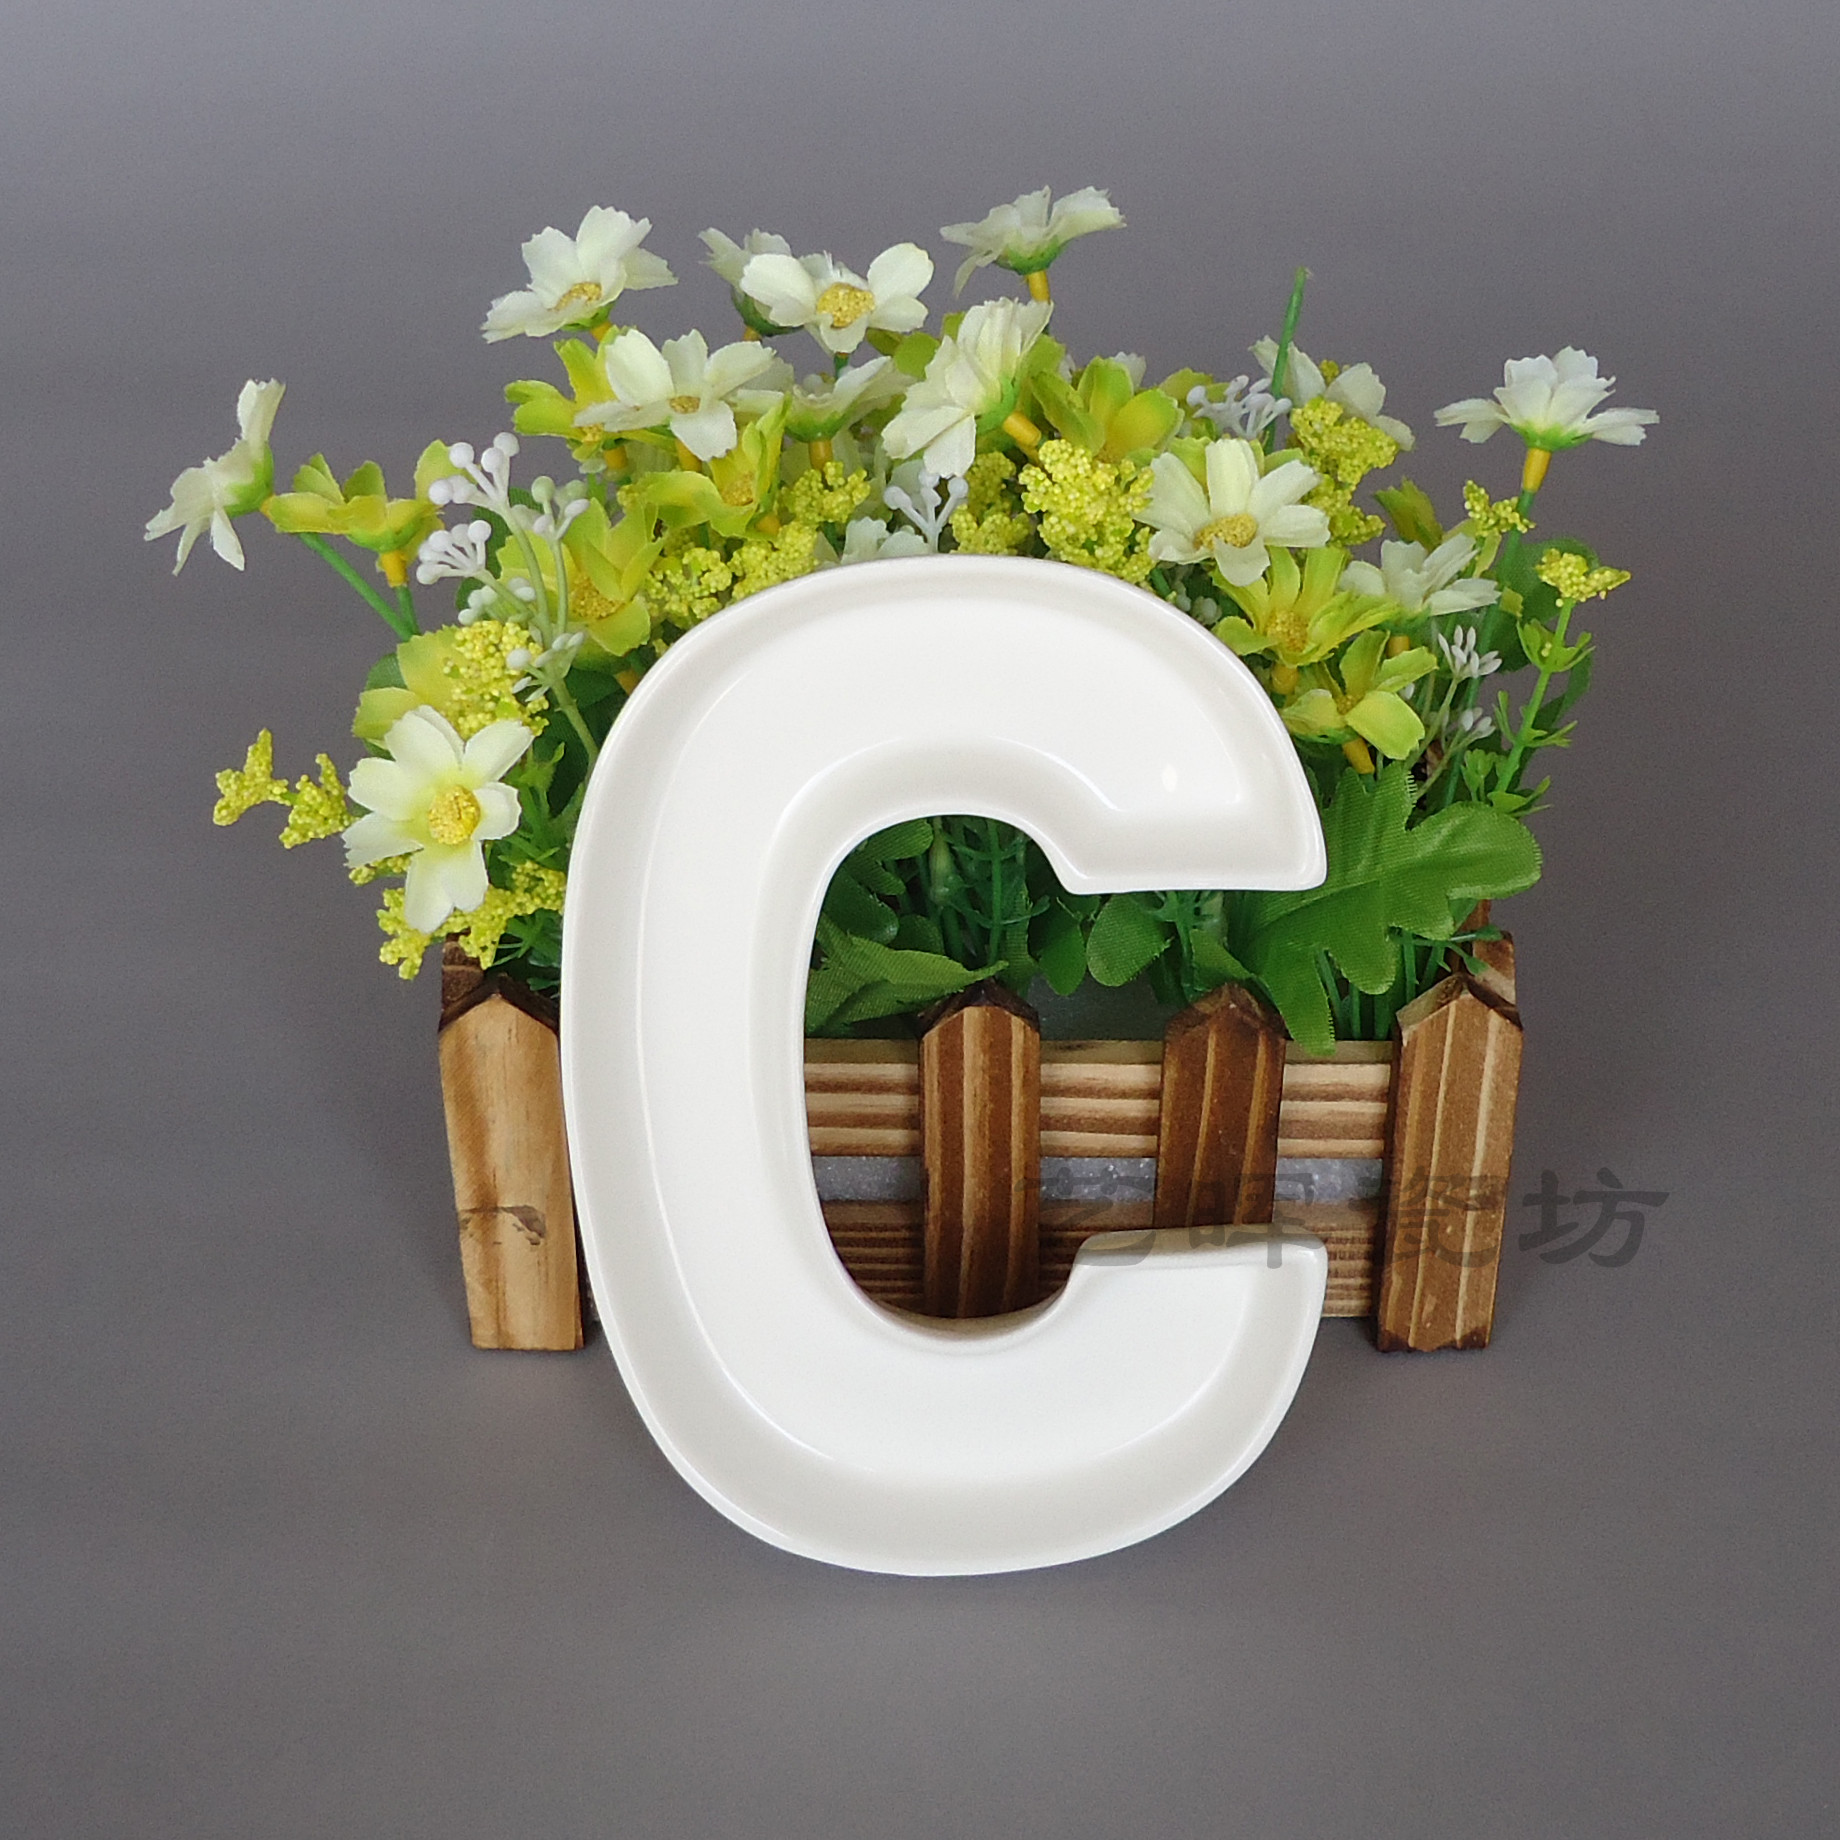 C shape ceramic letter dishes, Hot sale, Wholesale, Factory price-inPorcelain Plates from Home ...